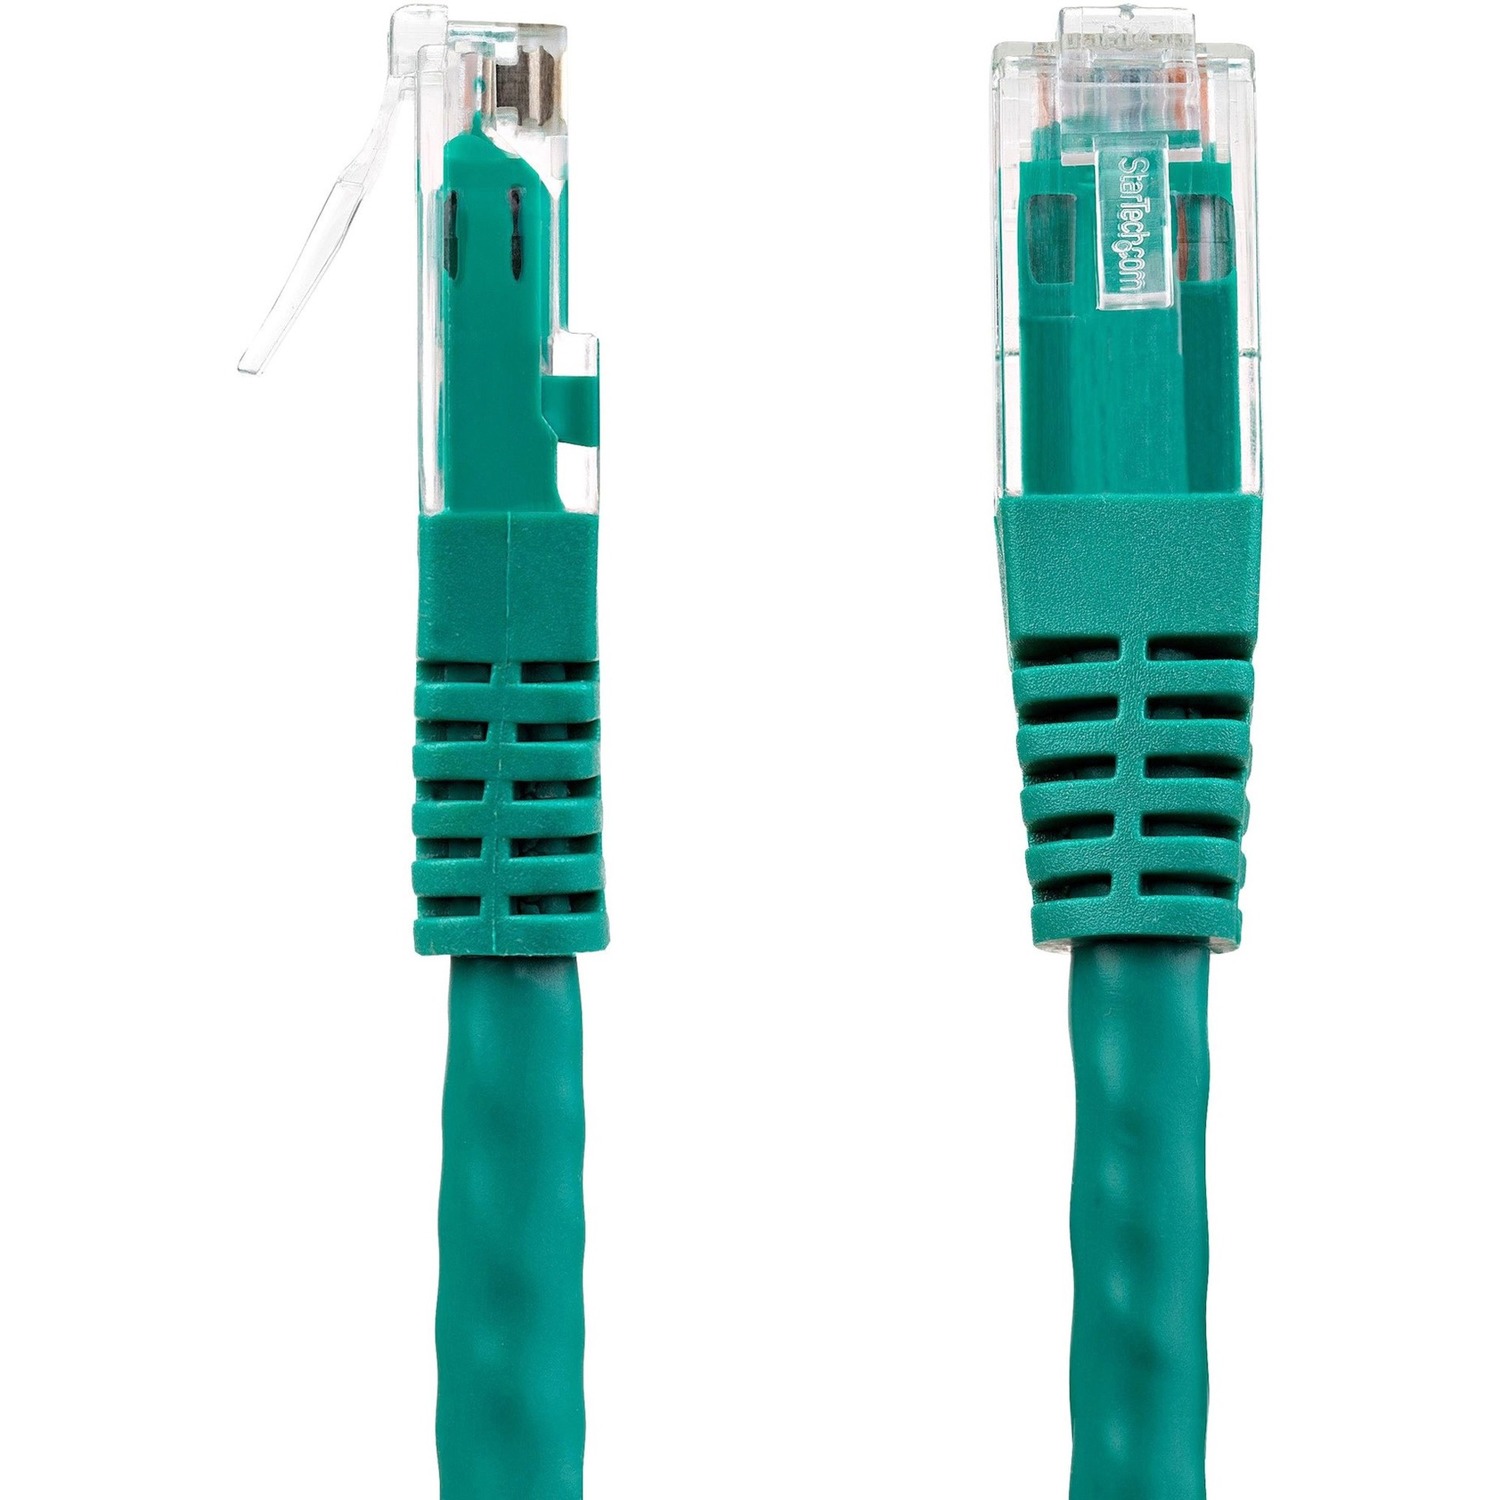 StarTech.com C6PATCH2GN 2 ft. Cat 6 Green Molded Cat6 UTP Patch Cable - image 3 of 3